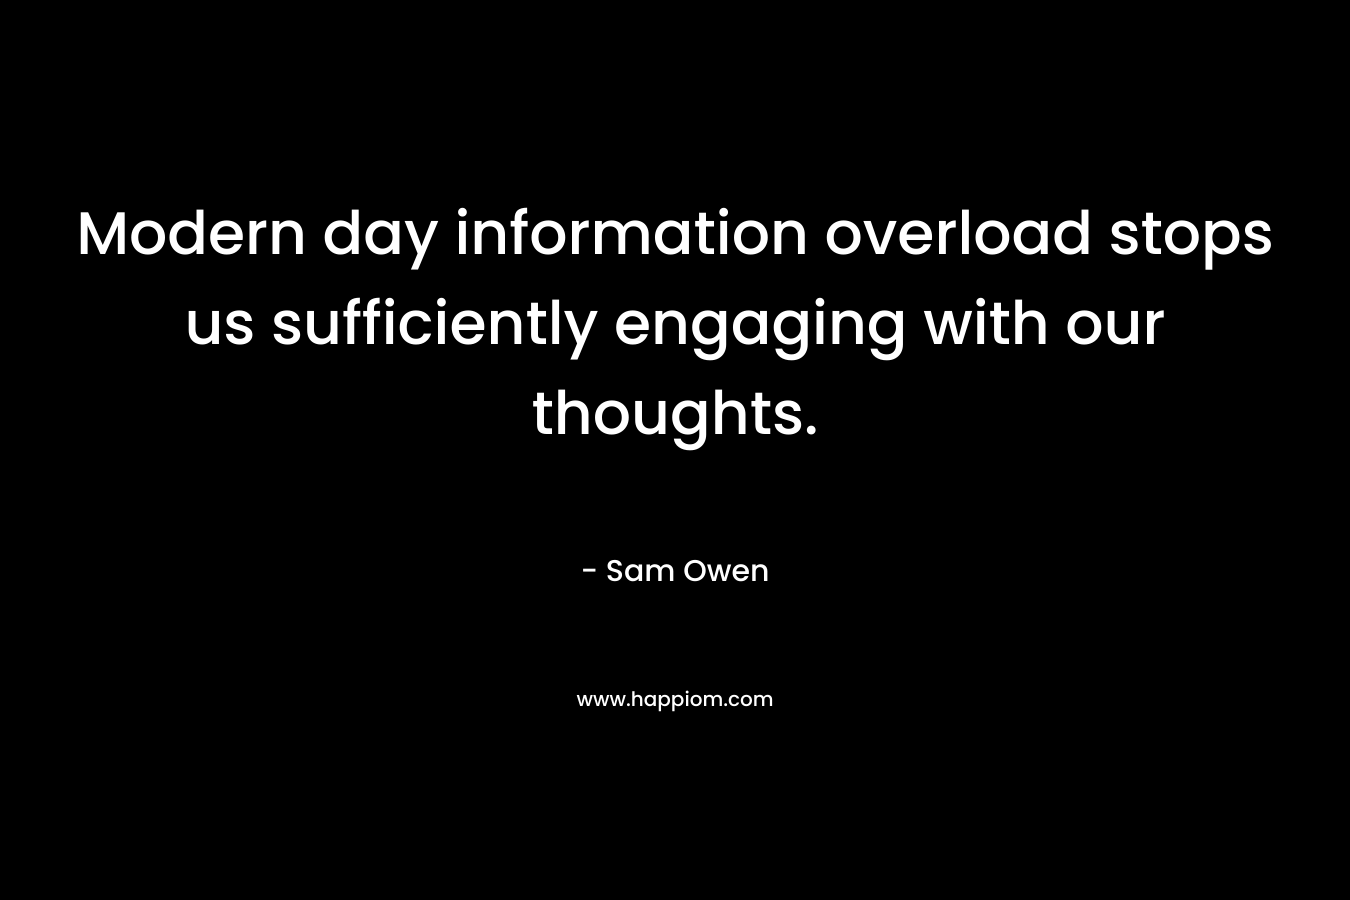 Modern day information overload stops us sufficiently engaging with our thoughts.